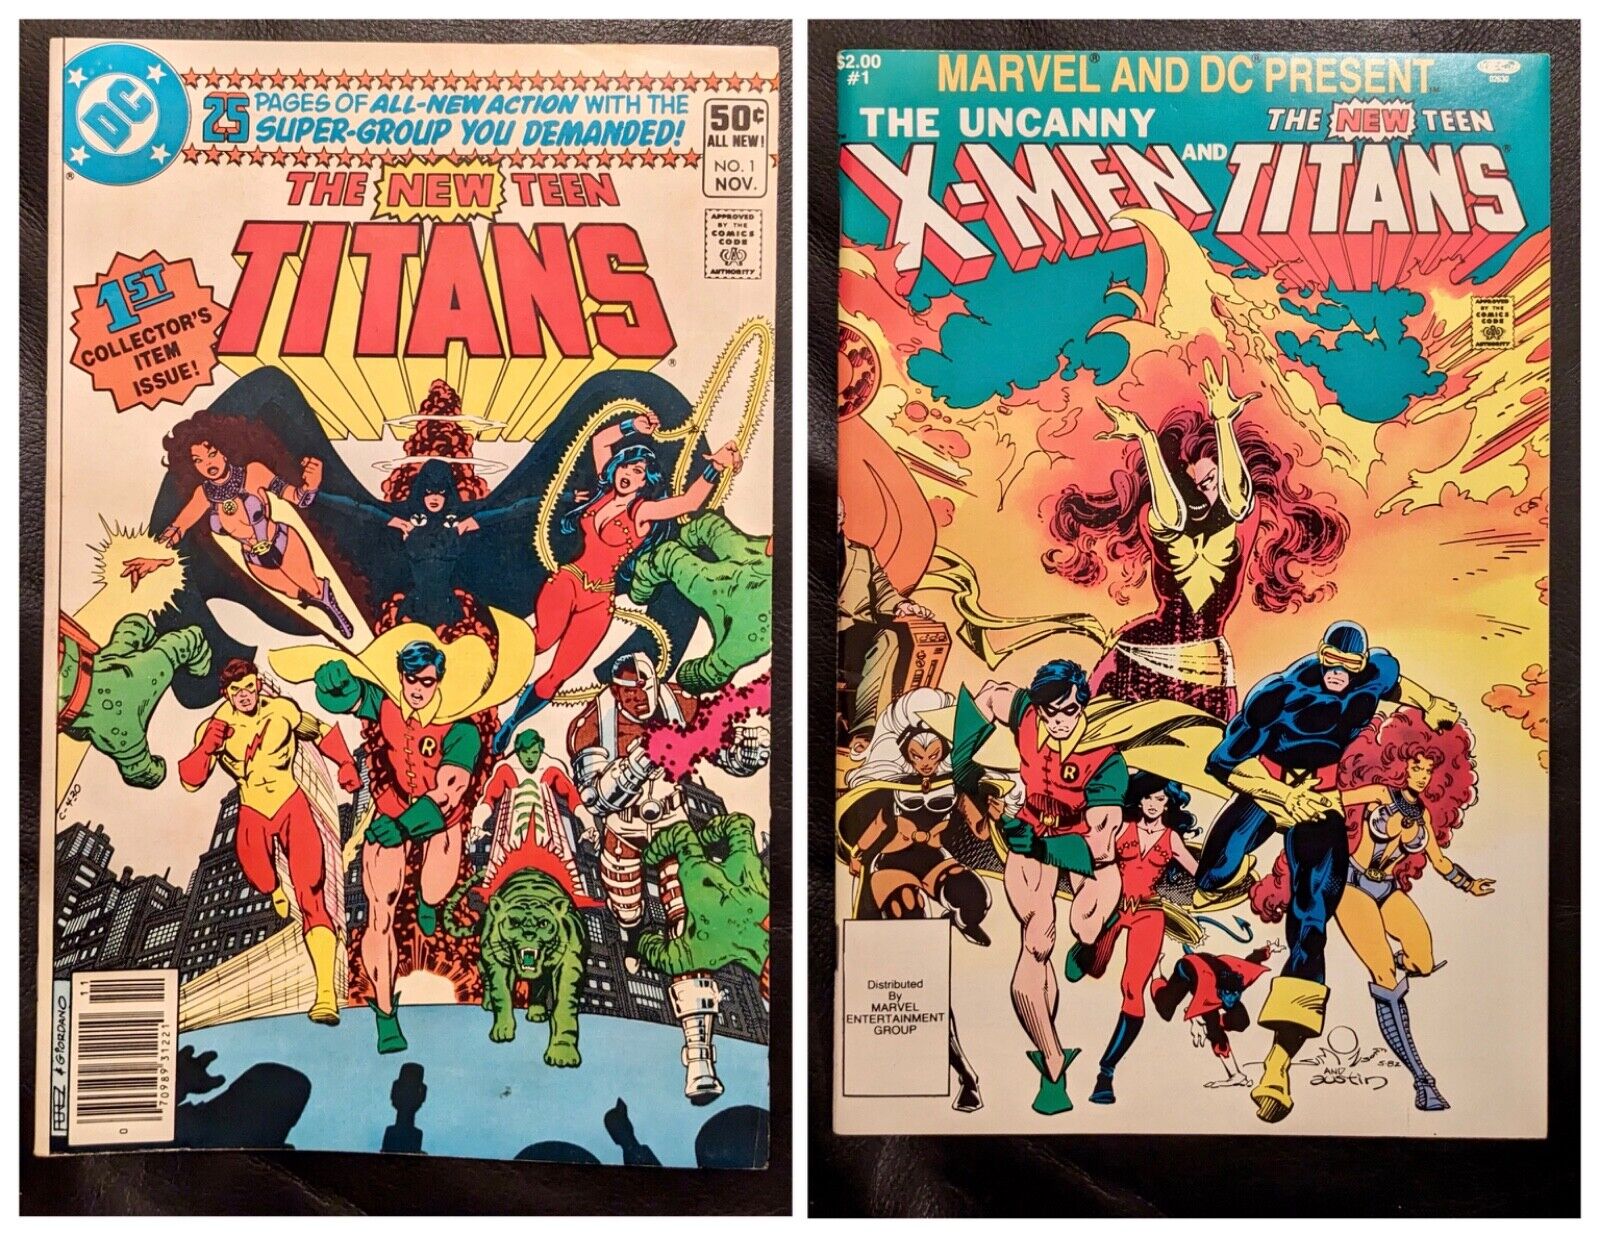 NEW TEEN TITANS #1 FN, X-Men and The New Teen Titans #1 VF-NM SET